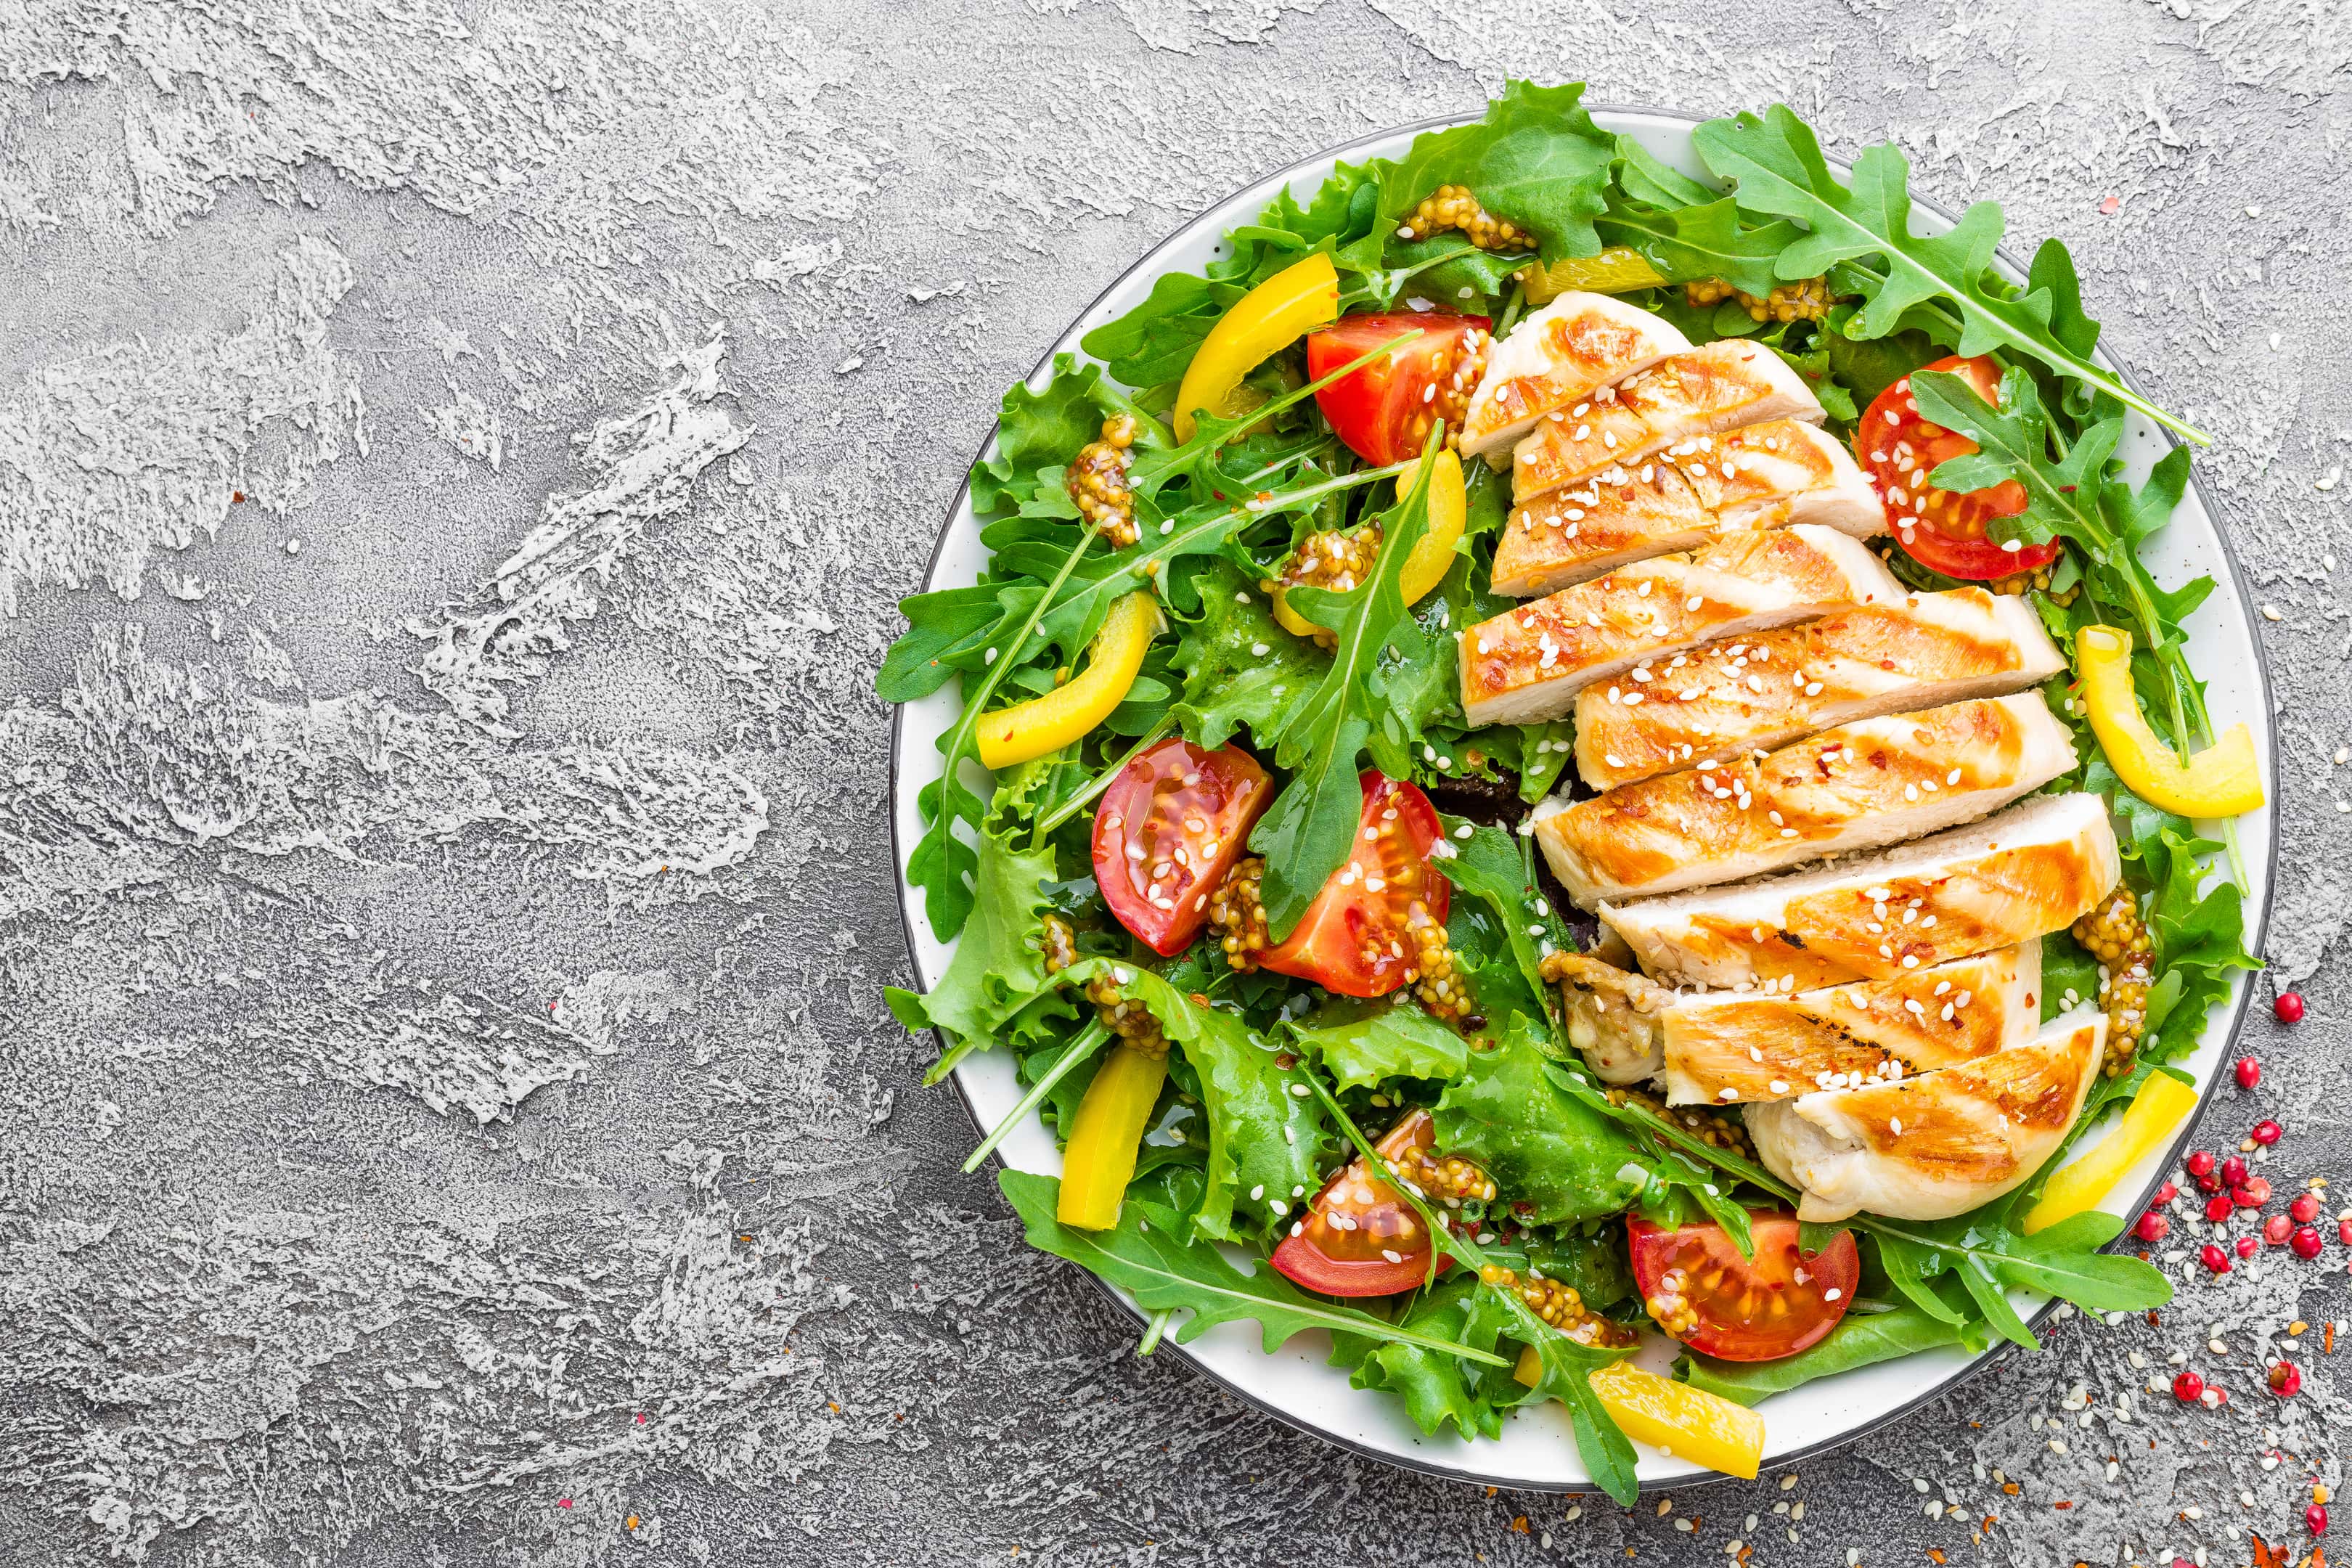 Salad with fresh tomato, sweet pepper, arugula and grilled chicken breast